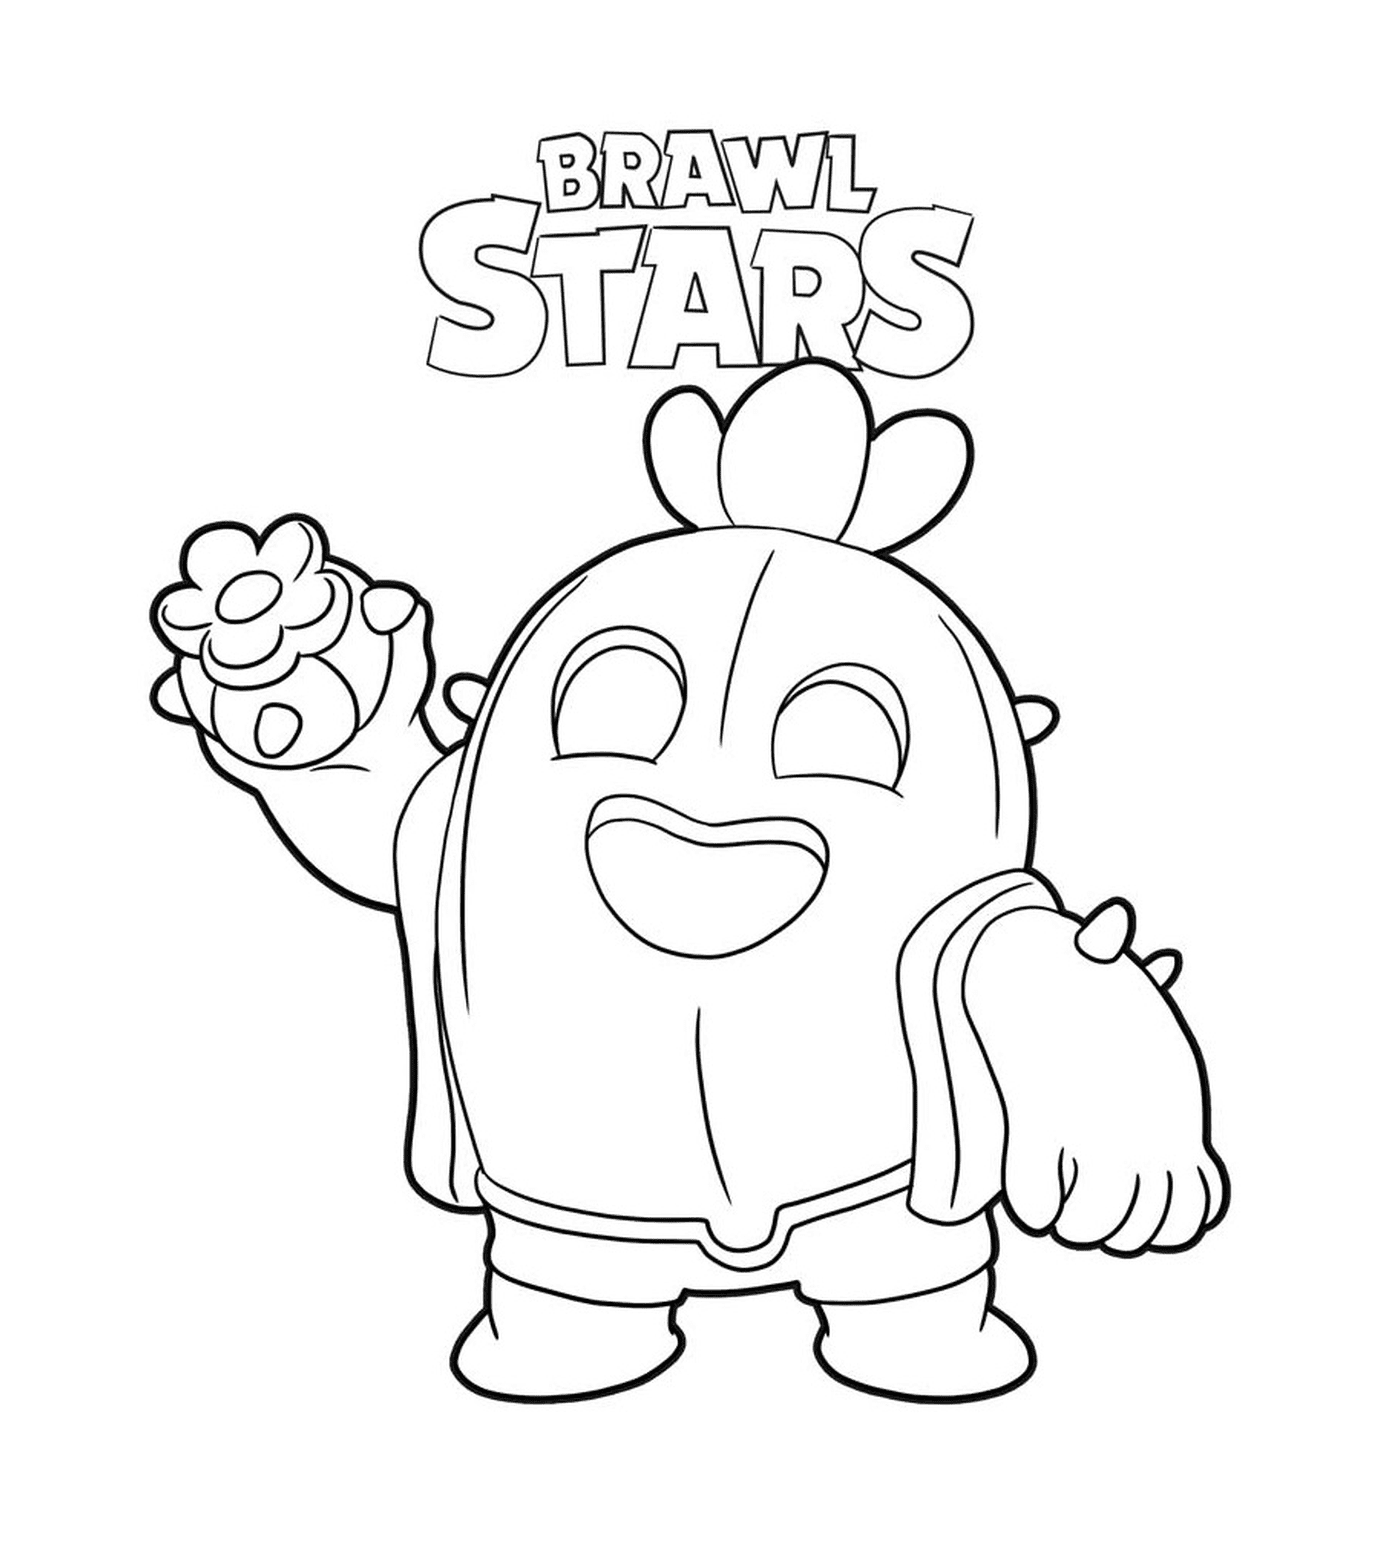  A character from Brawl Stars named Spike 